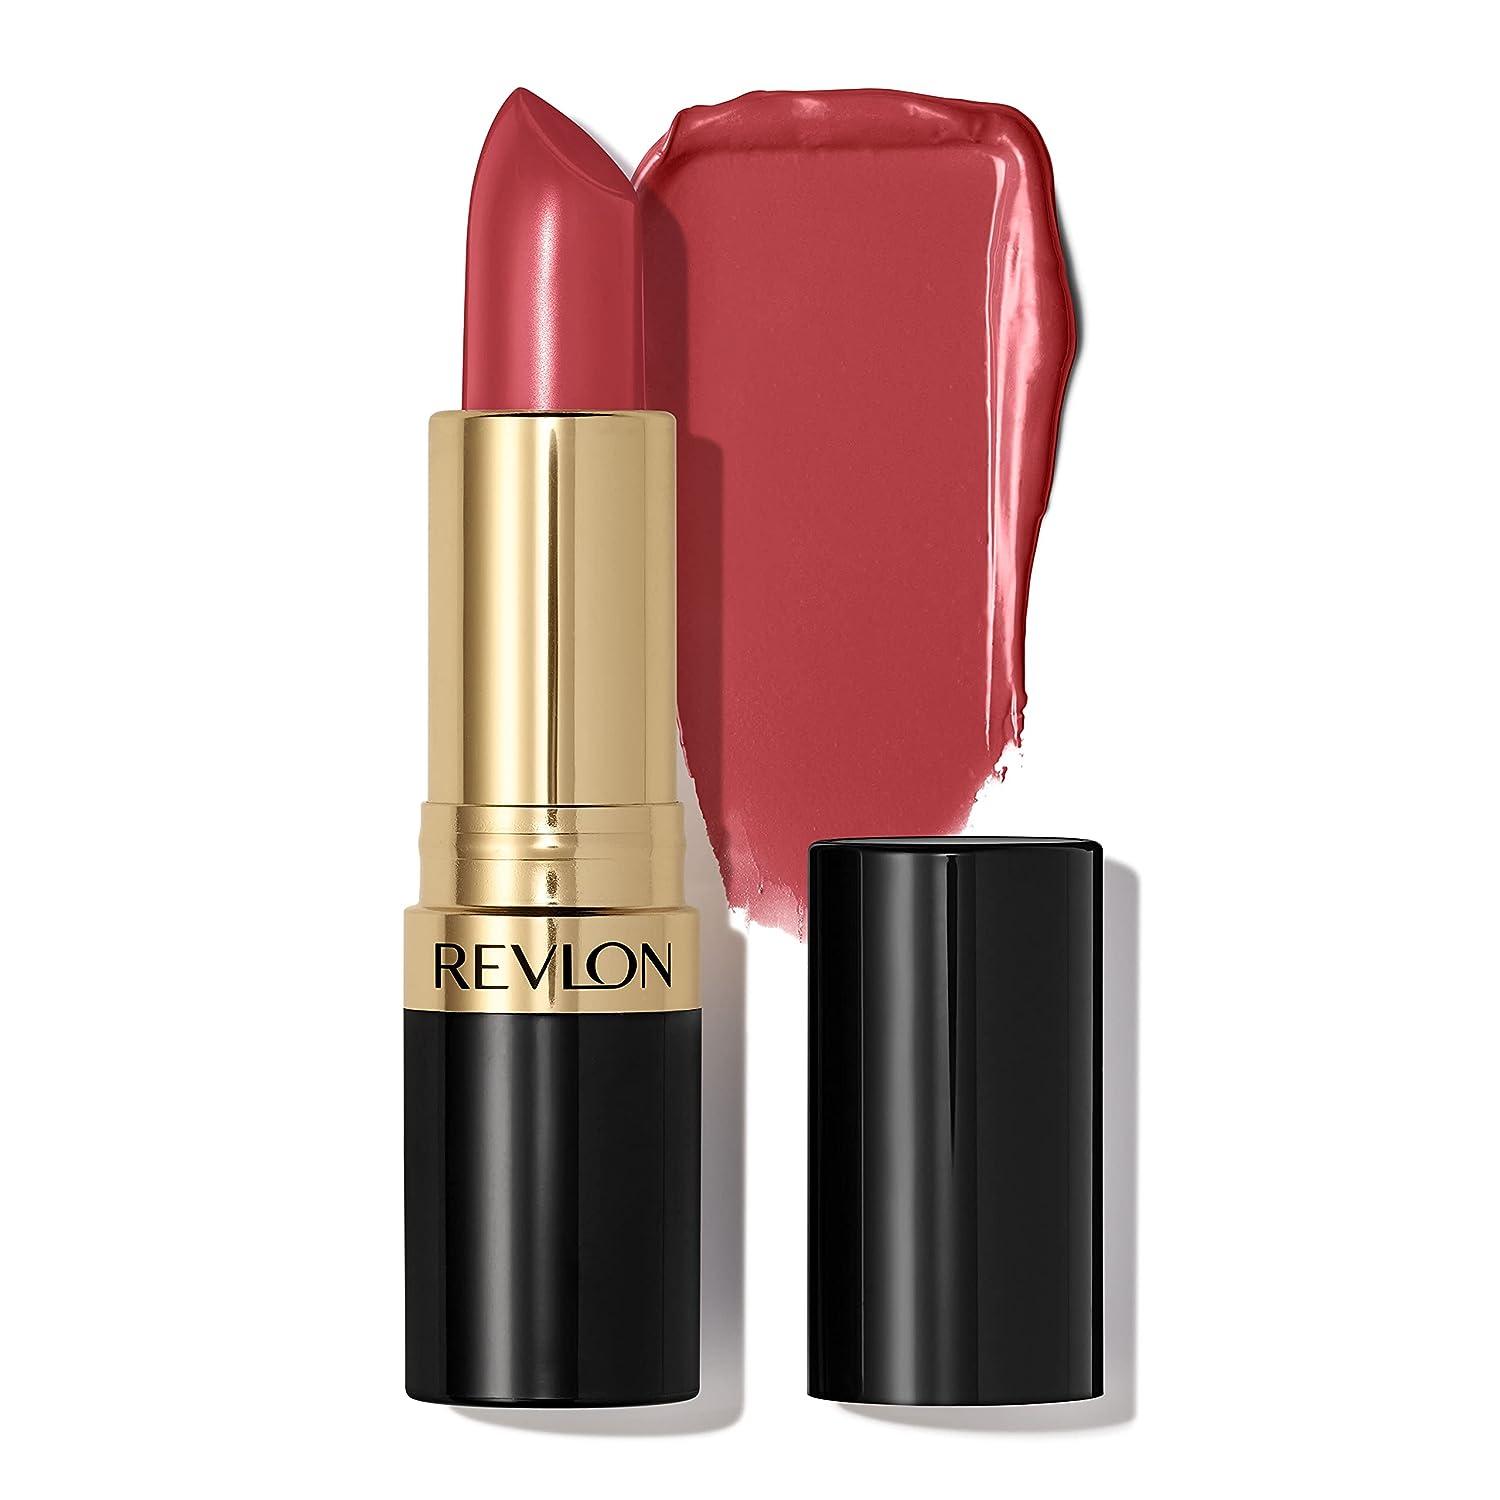 Revlon Super Lustrous Lipstick High Impact Lipcolor with Moisturizing  Creamy Formula Infused with Vitamin E and Avocado Oil in Reds & Corals  Rosewine (225) 0.15 oz Rosewine (225) Rosewine Pack of 1